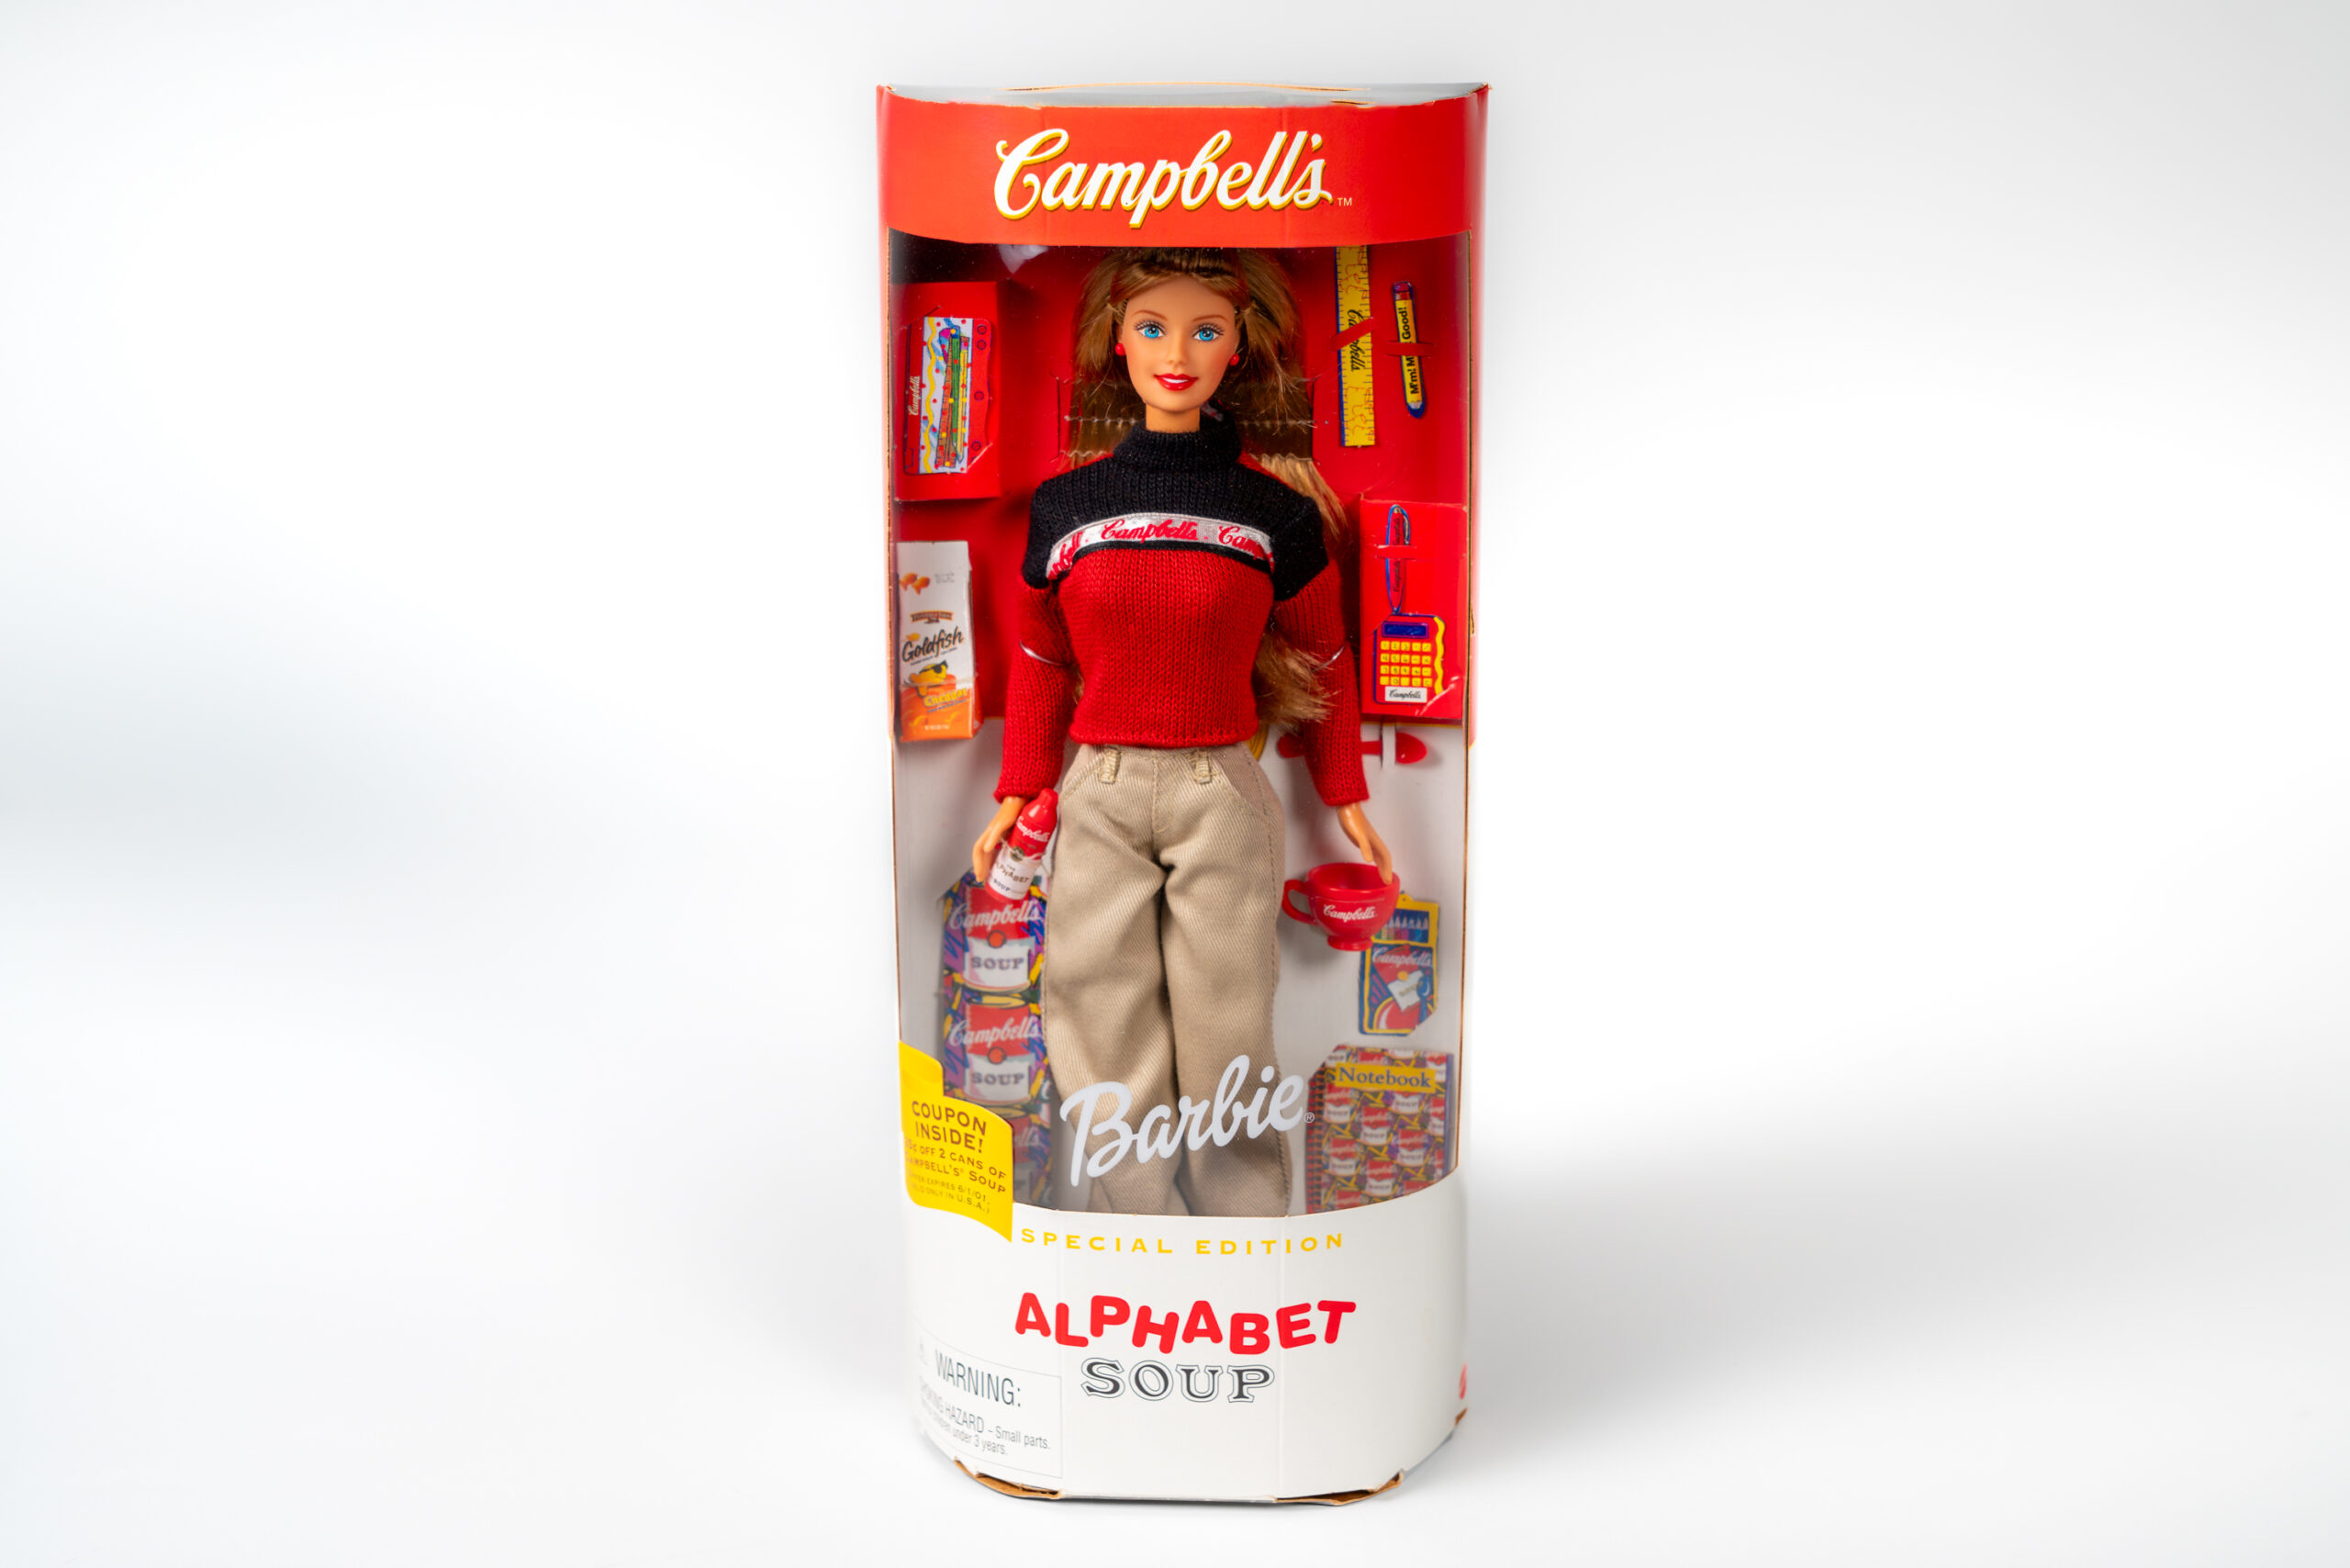 Alphabet Soup Barbie in packaging, featuring Campbell’s and Goldfish.